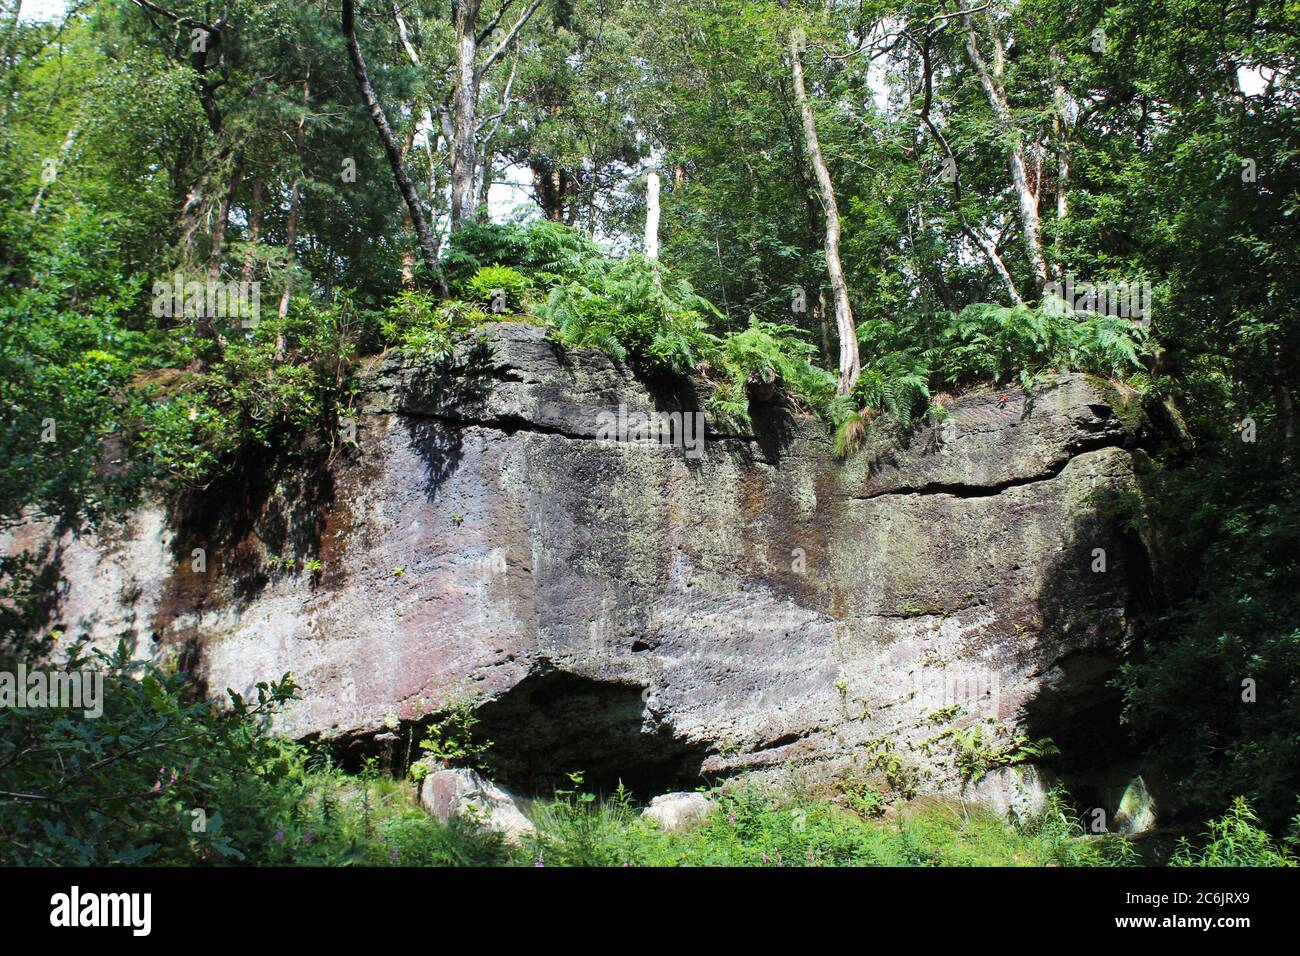 Overhanging, overgrown cliff rockface at Alderley edge in Cheshire, England Stock Photo